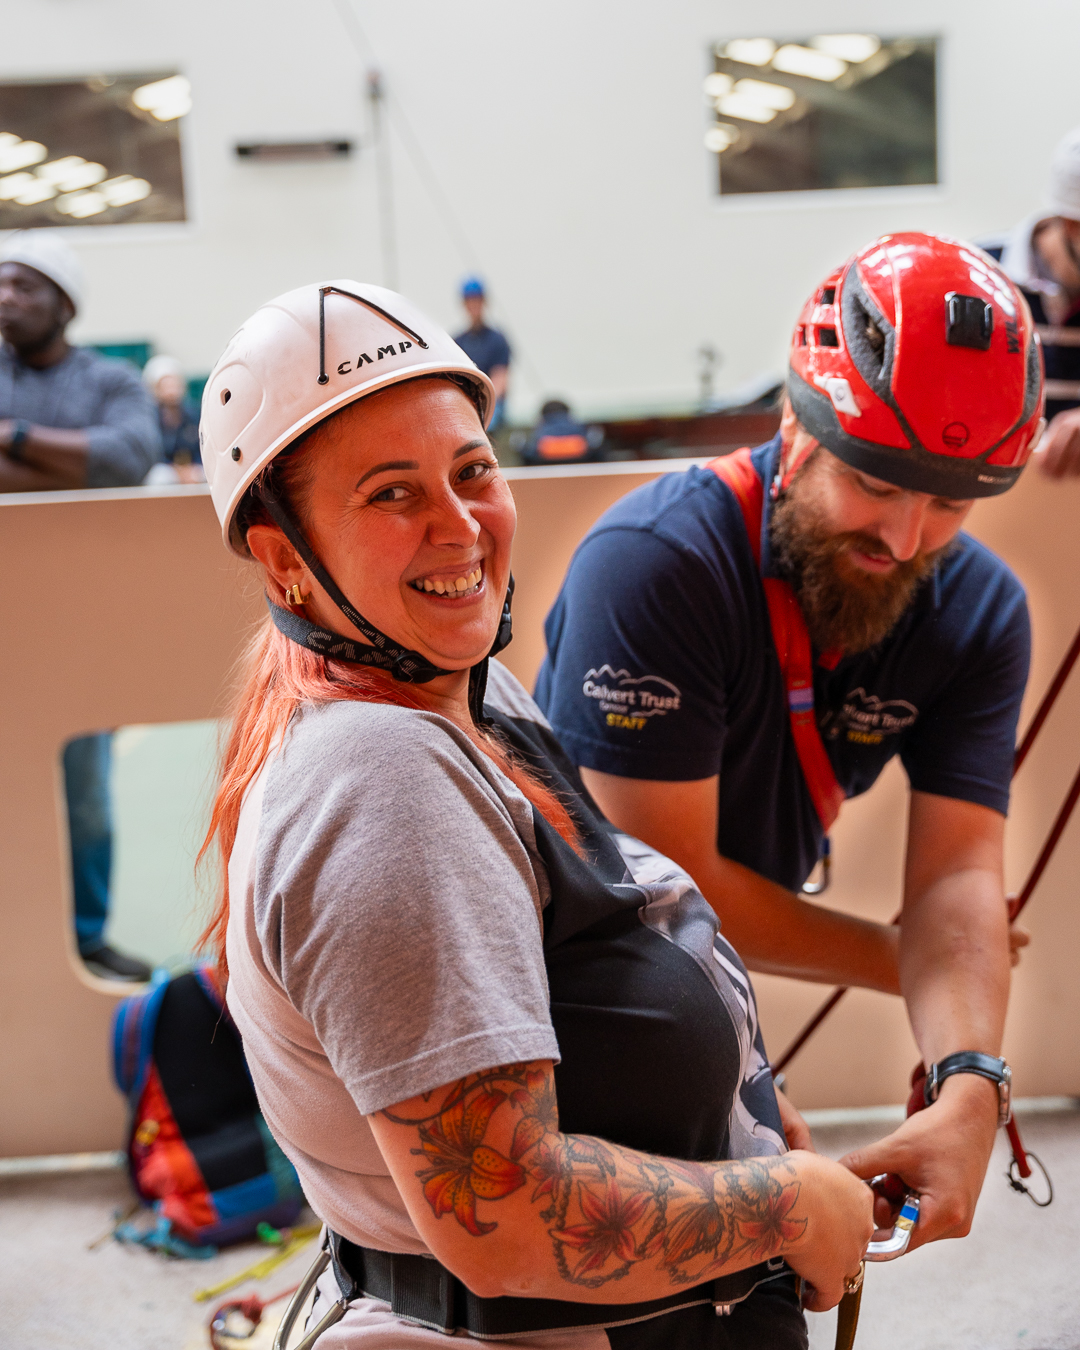 A guest is turning to face the camera, wearing a white helmet and harness, as a member of Calvert Exmoor staff is securing a carabiner to her harness, which is attached to a rope in the indoor climbing wall area.